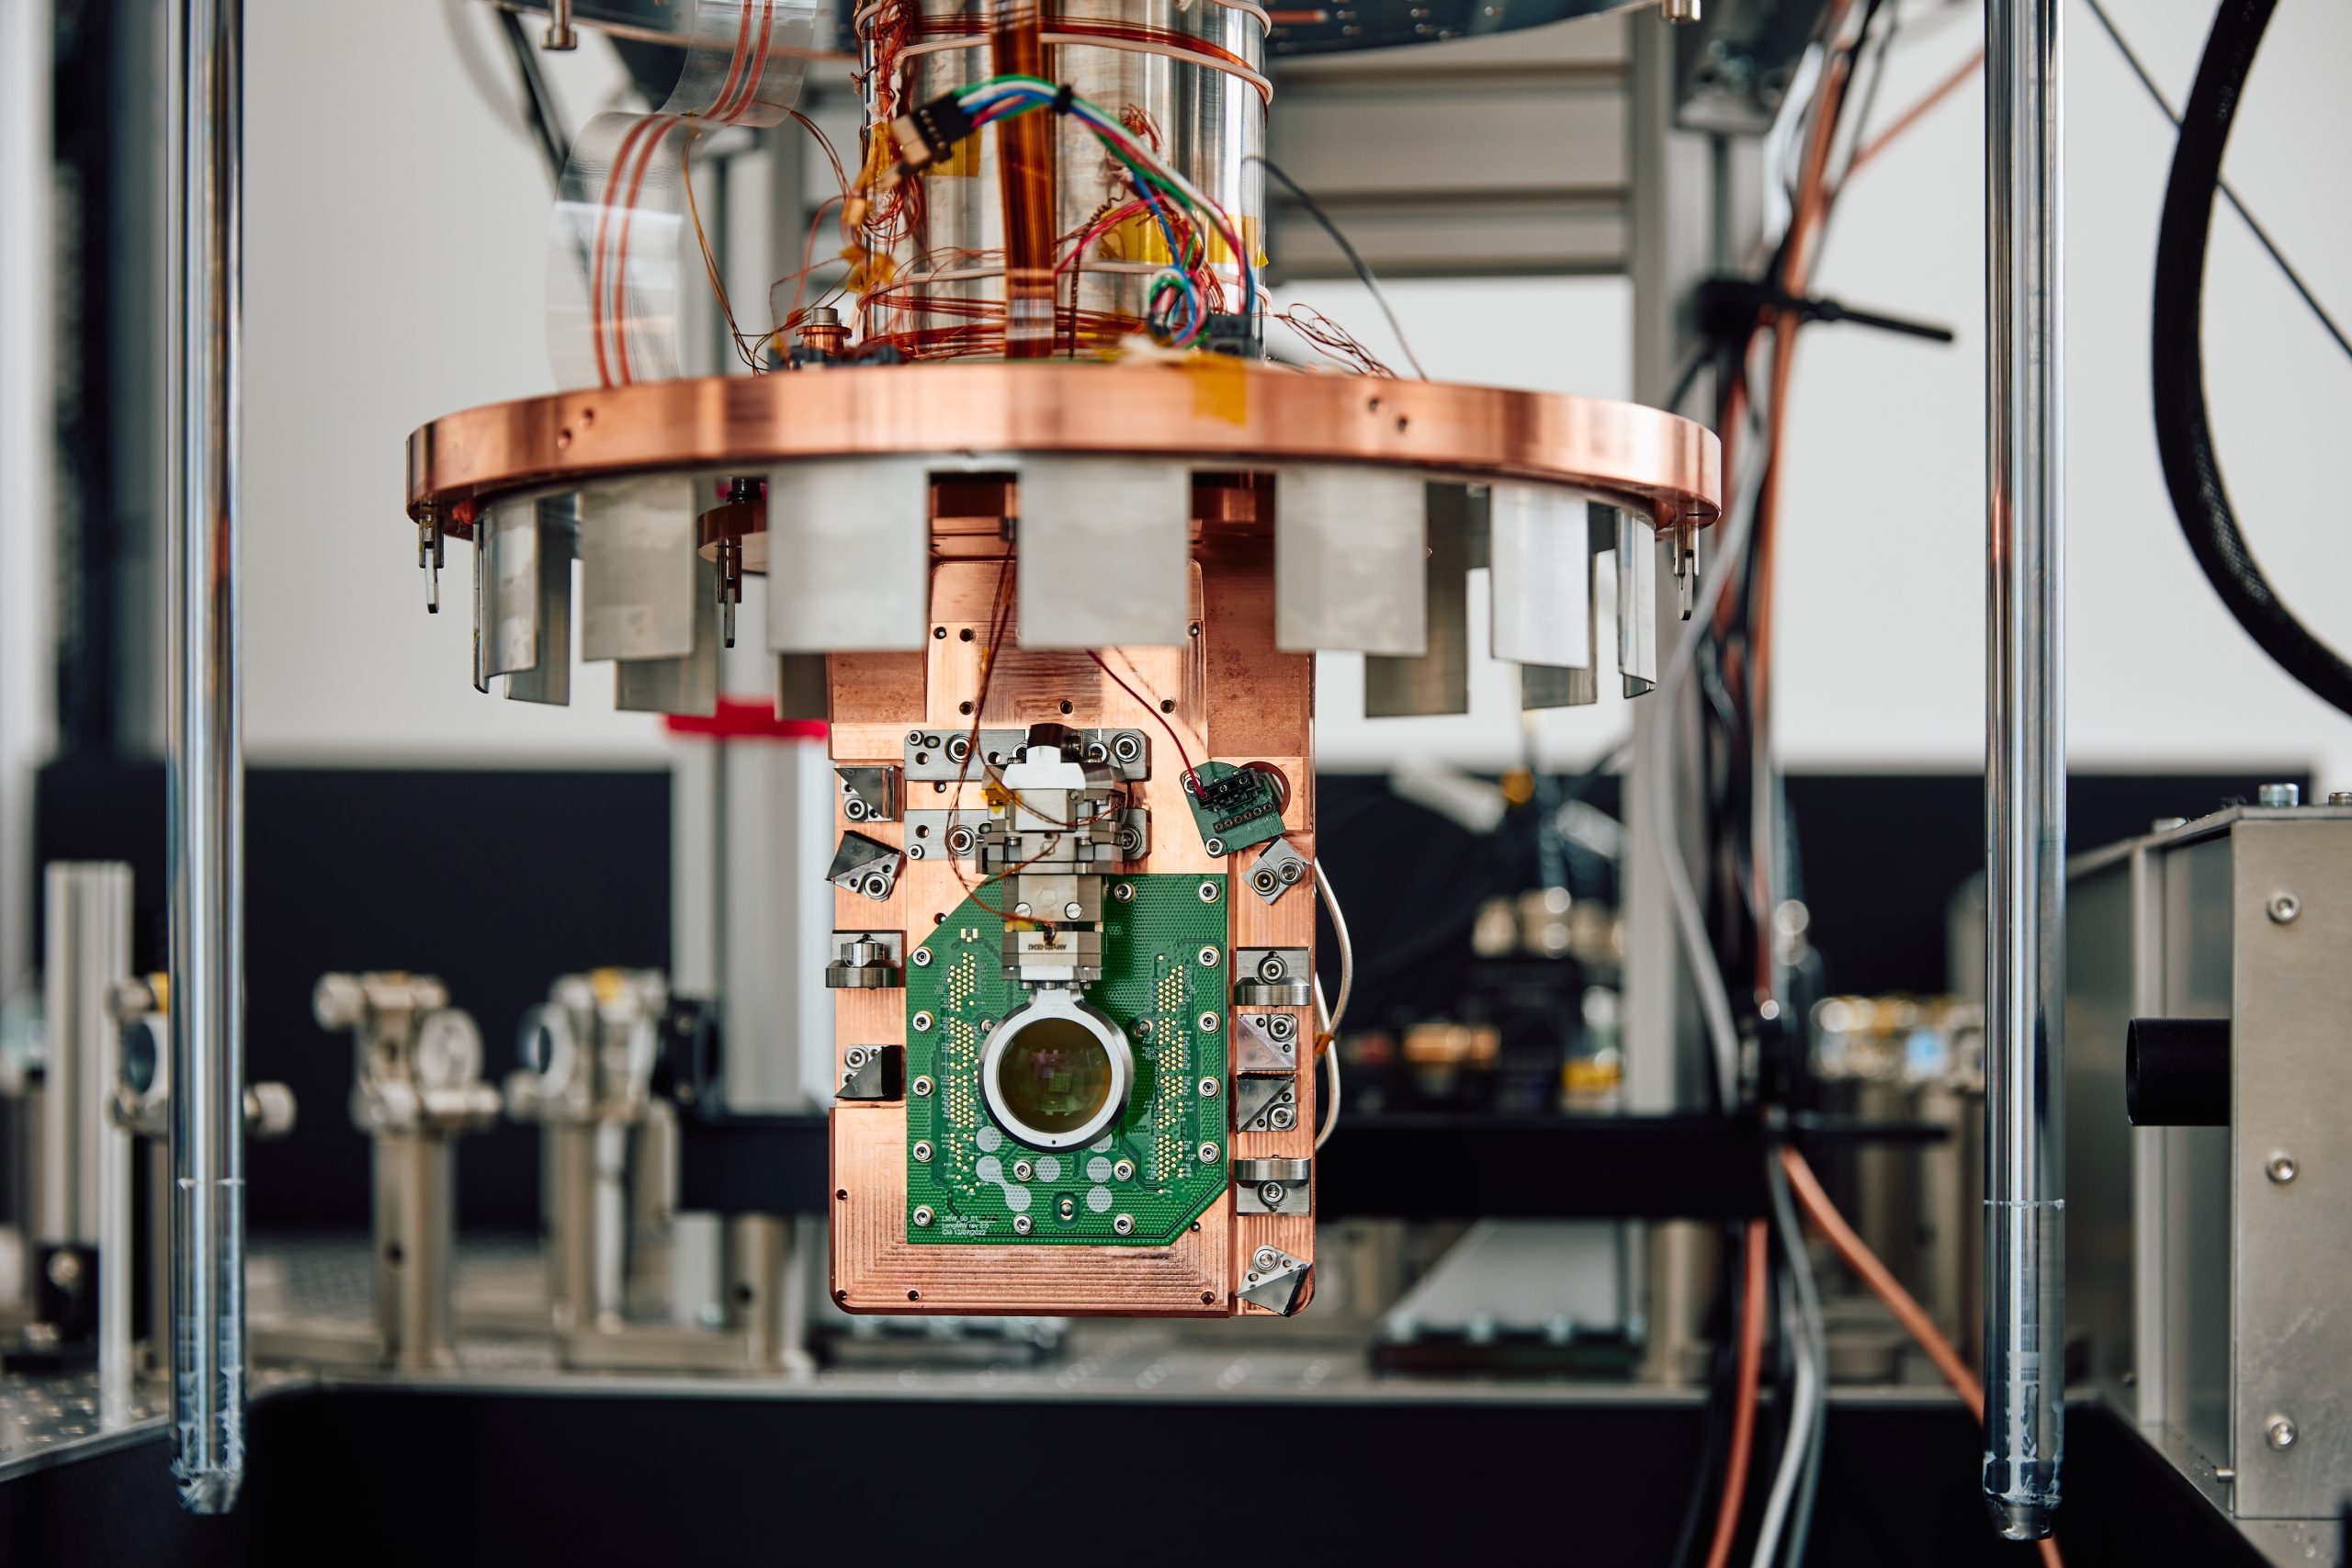 Oxford Ionics Raises £30 Million To Further Trapped Ion Quantum Computing With Backers That Include The Co-Founder Of Arm, Hermann Hauser